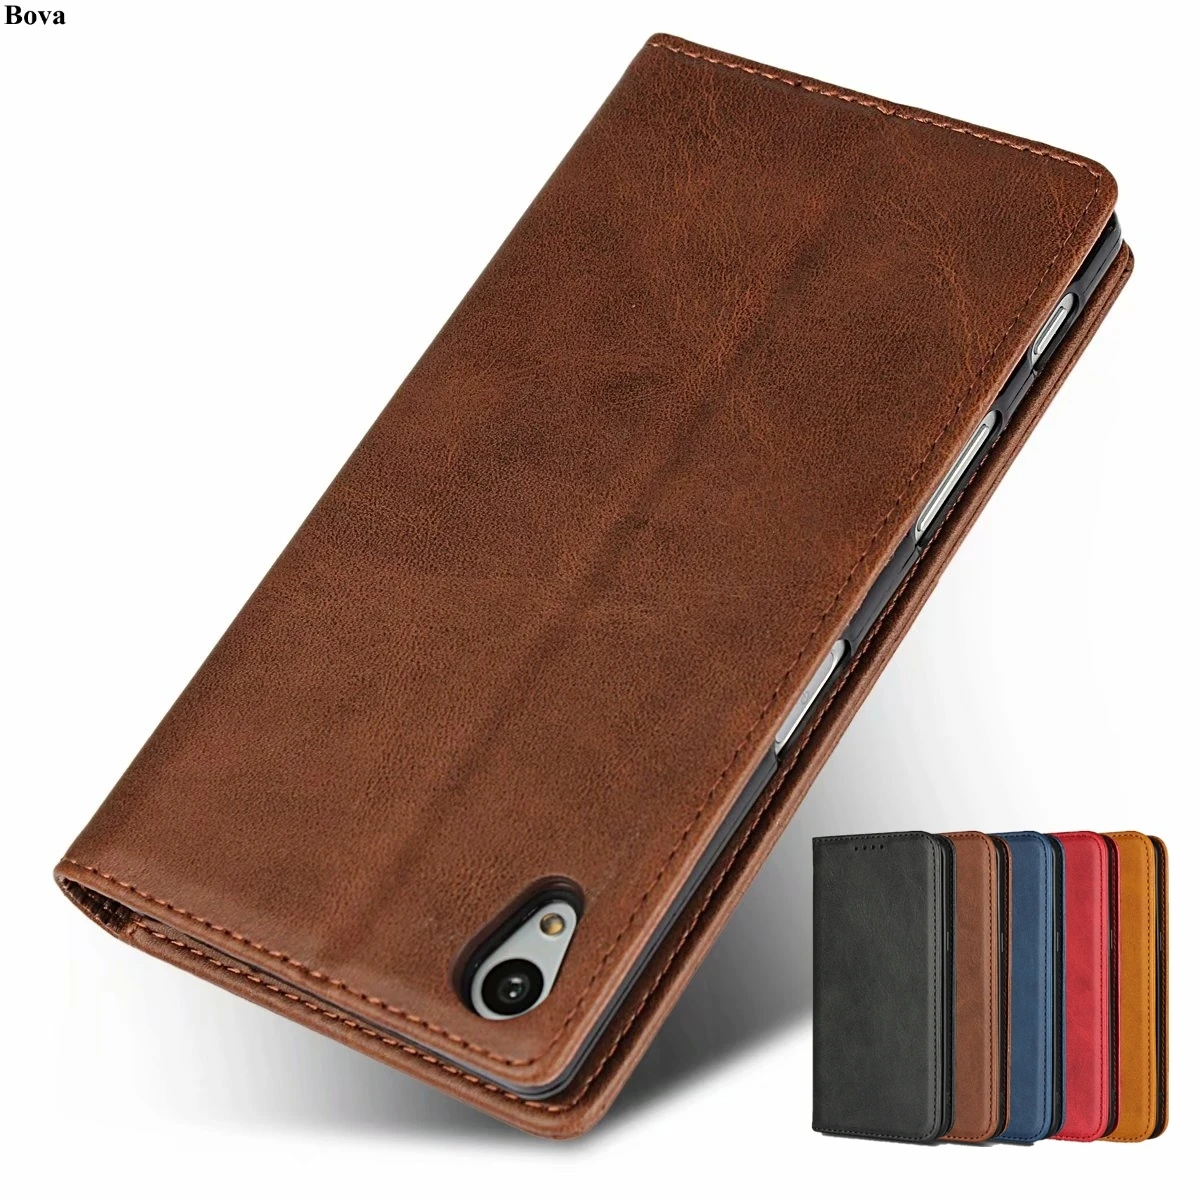 

Leather case for Sony Xperia Z5 E6603 E6633 E6683 for Sony Z5 flip case card holder Magnetic attraction cover Case Holster